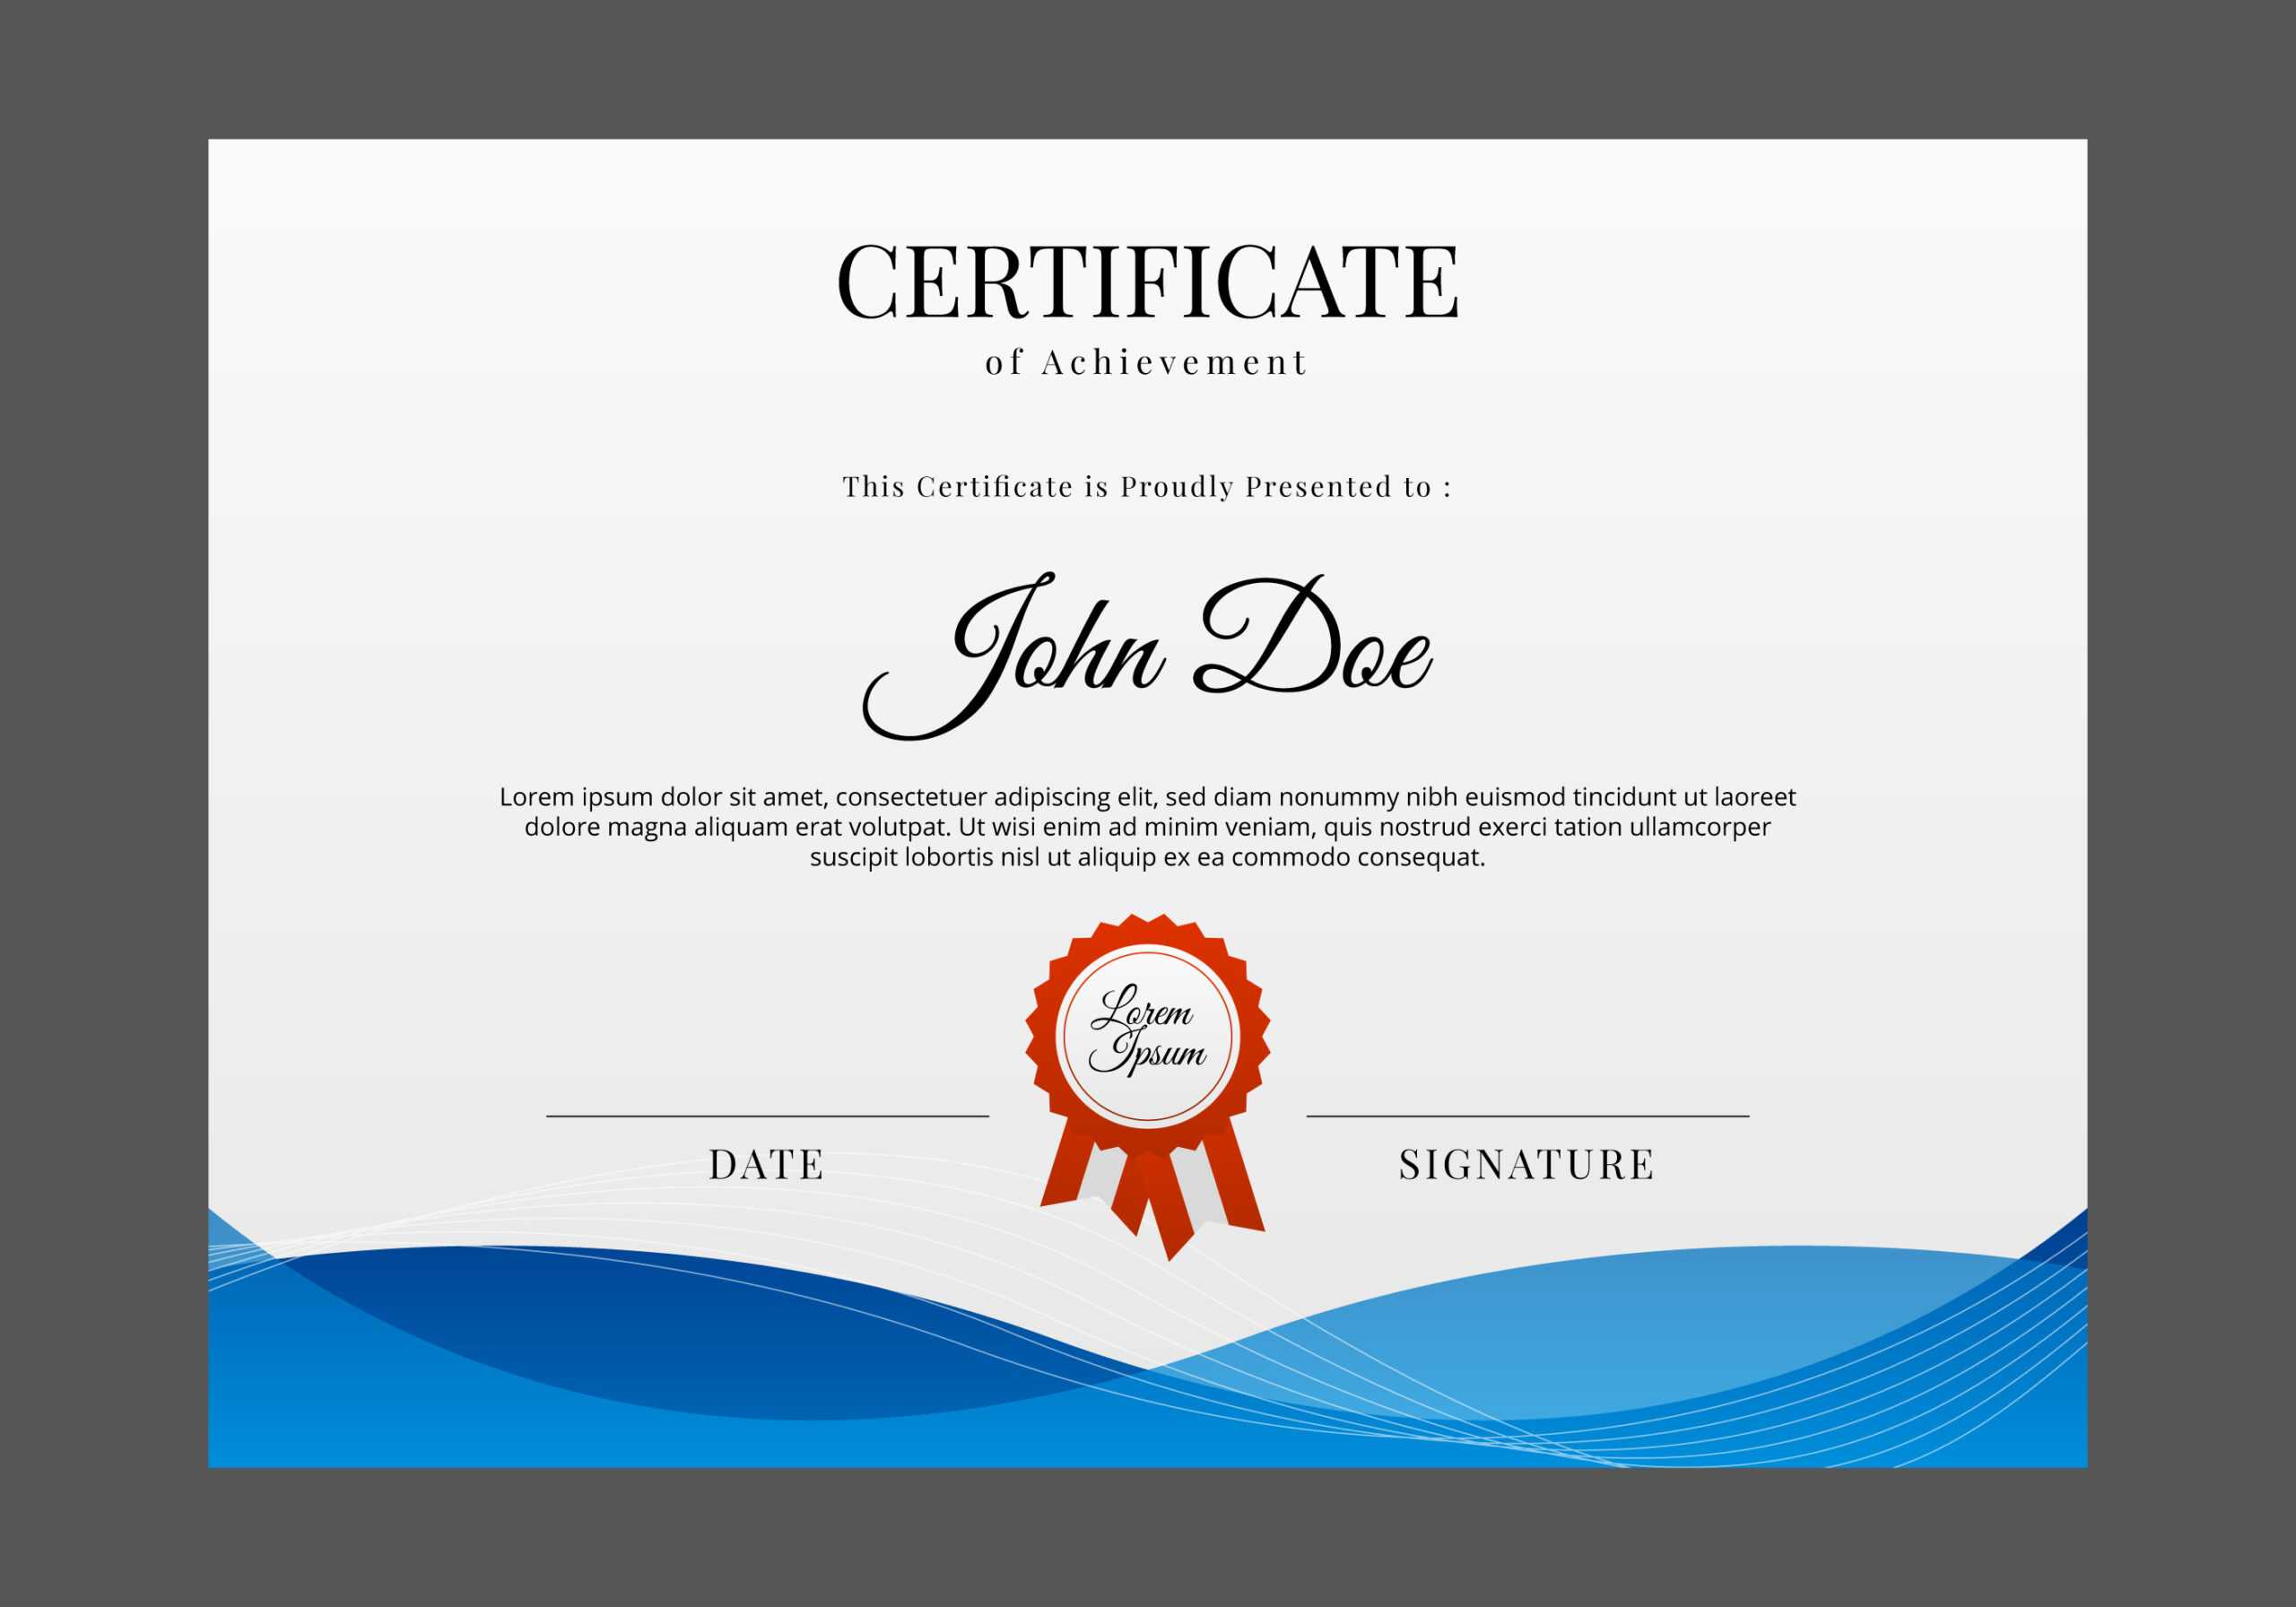 Certificate Templates, Free Certificate Designs With Professional Certificate Templates For Word